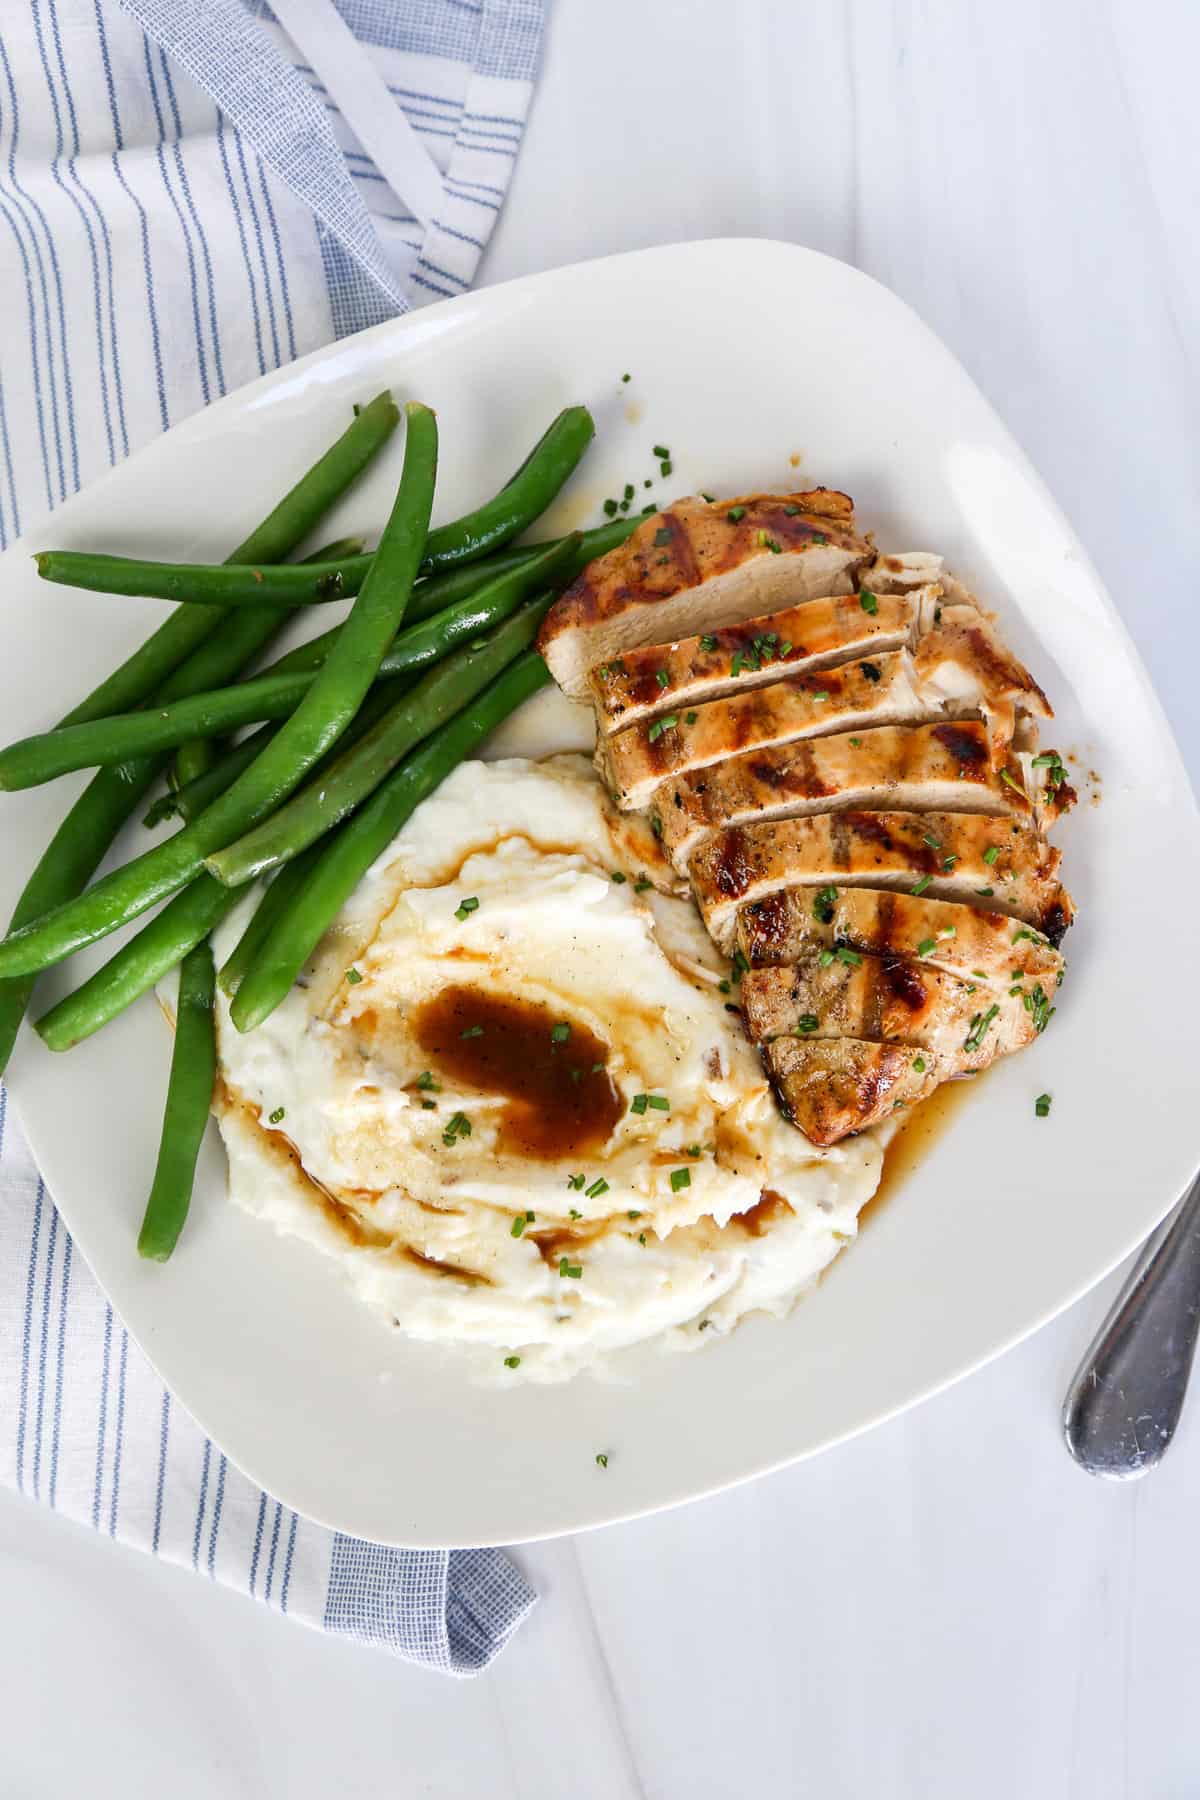 Grilled savory chicken breast with mashed potatoes and green beans on a plate.